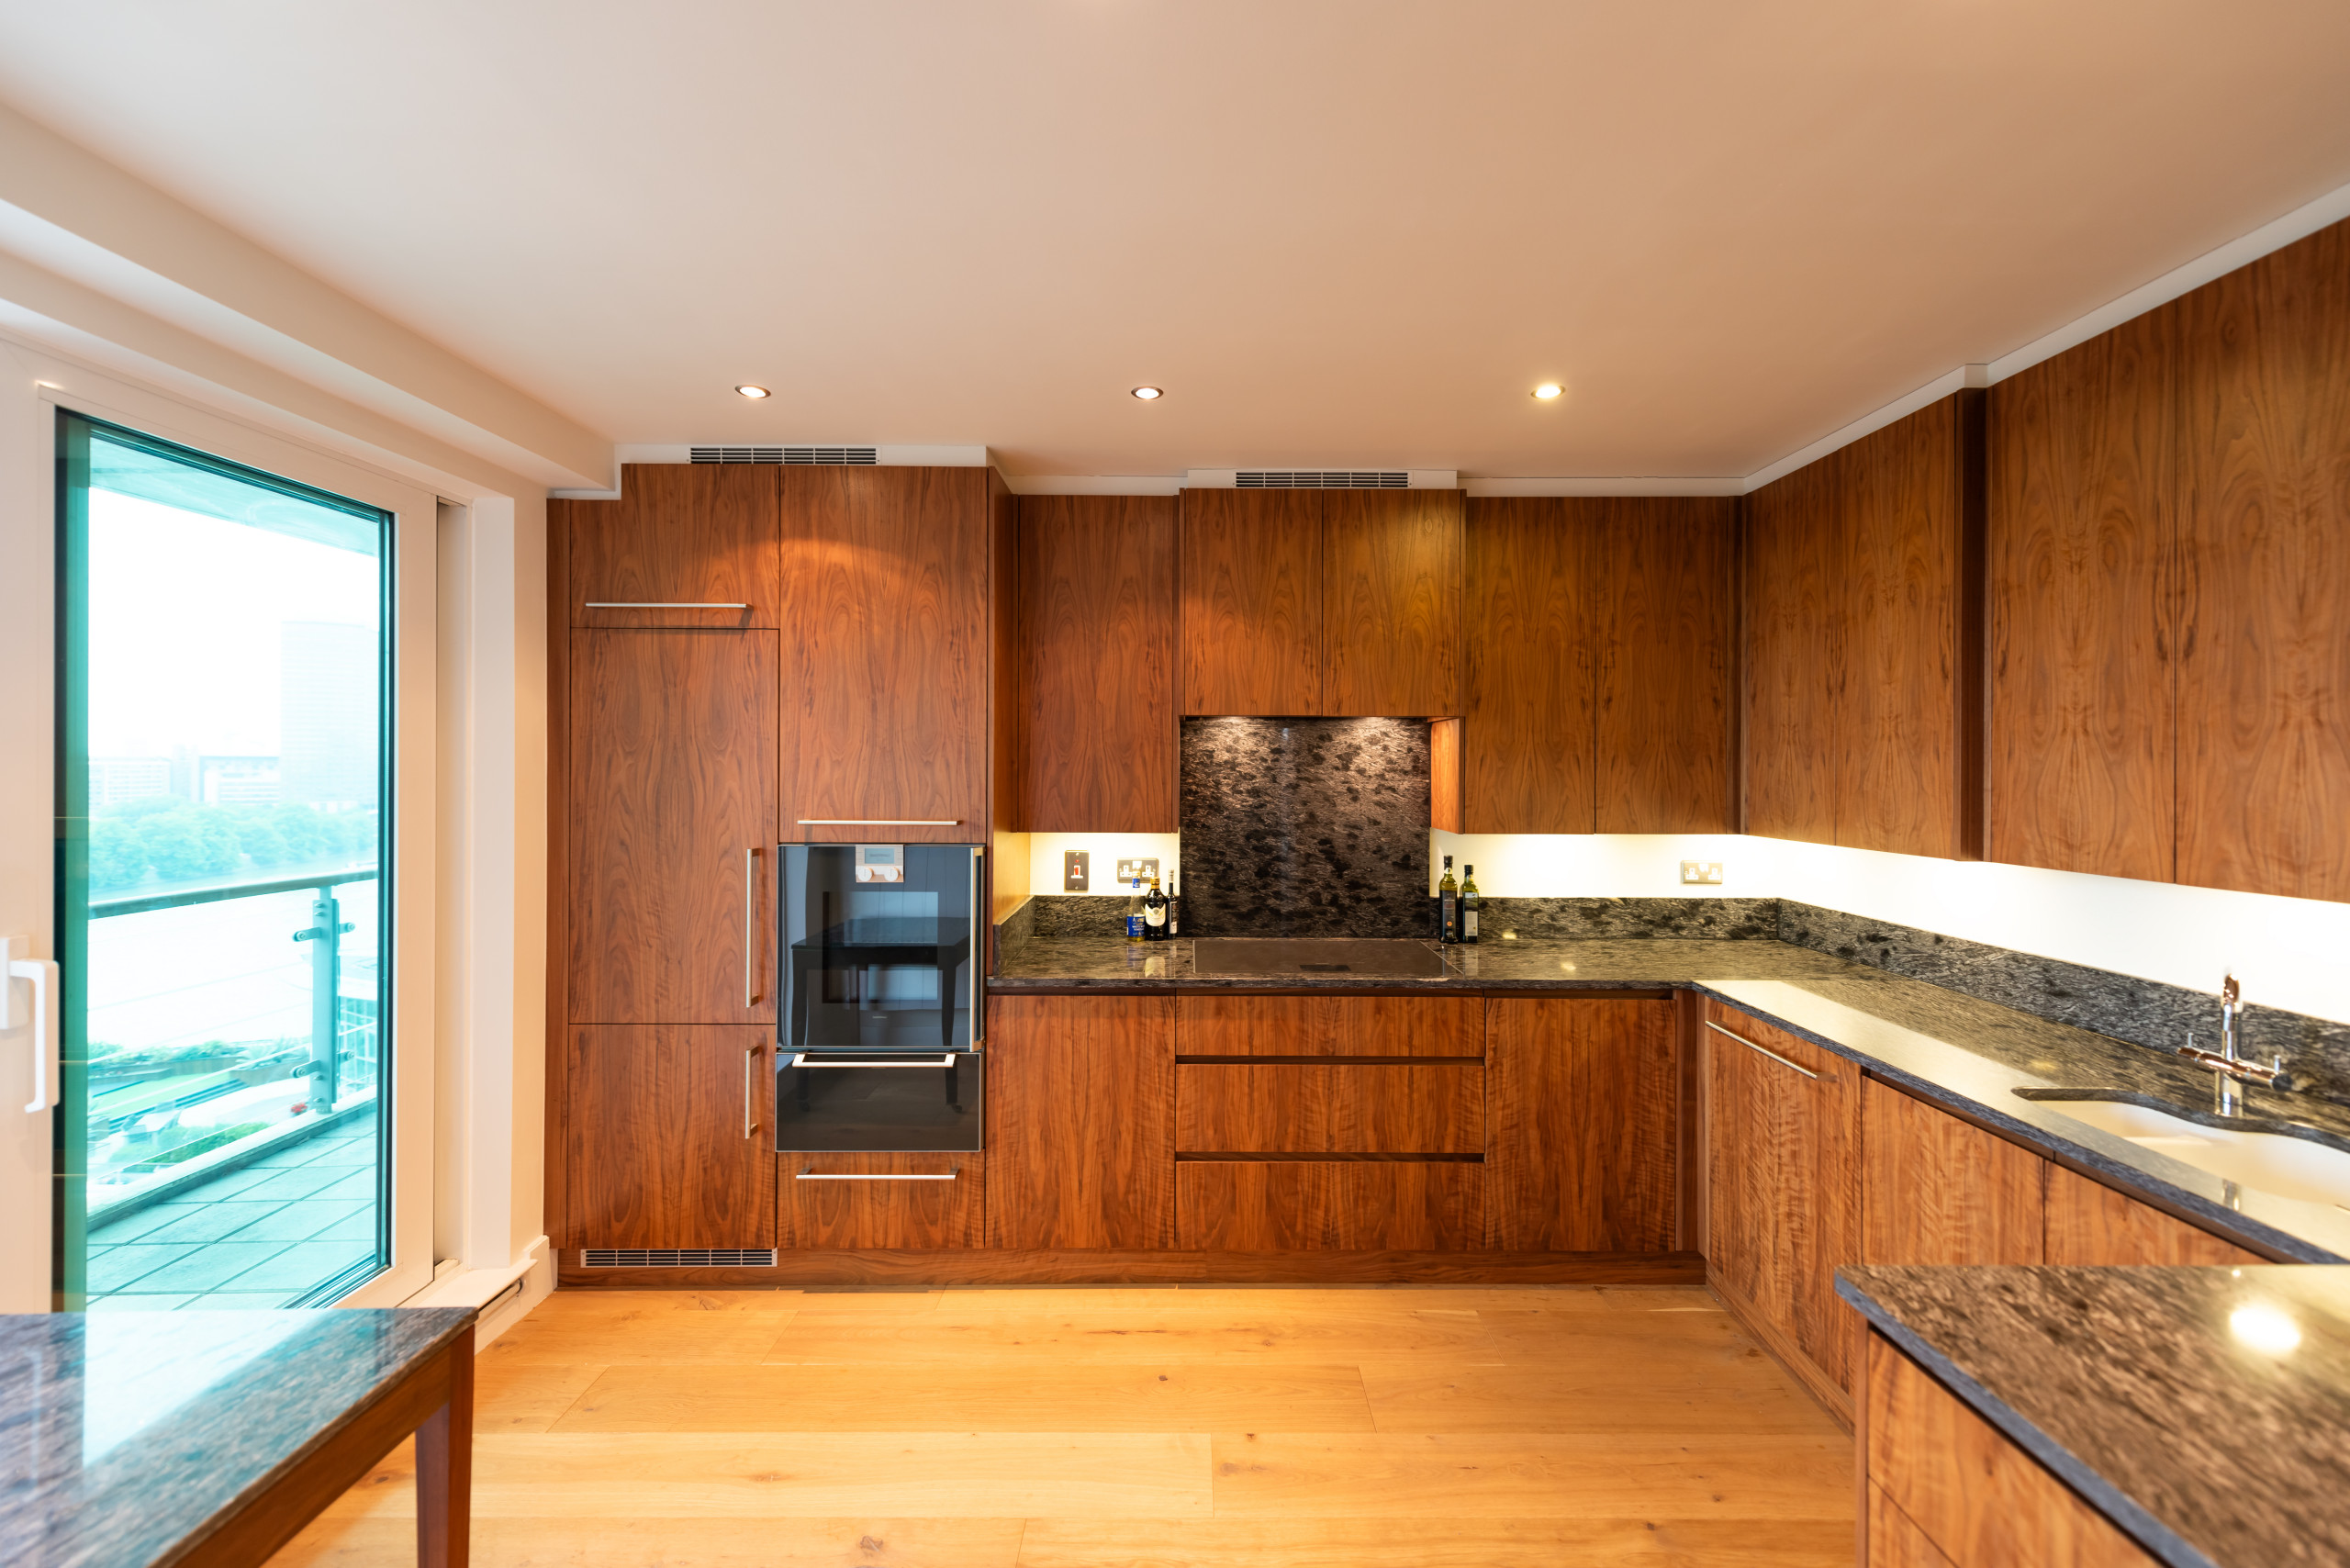 American Black Walnut Vauxhall Kitchen designed and made by Tim Wood